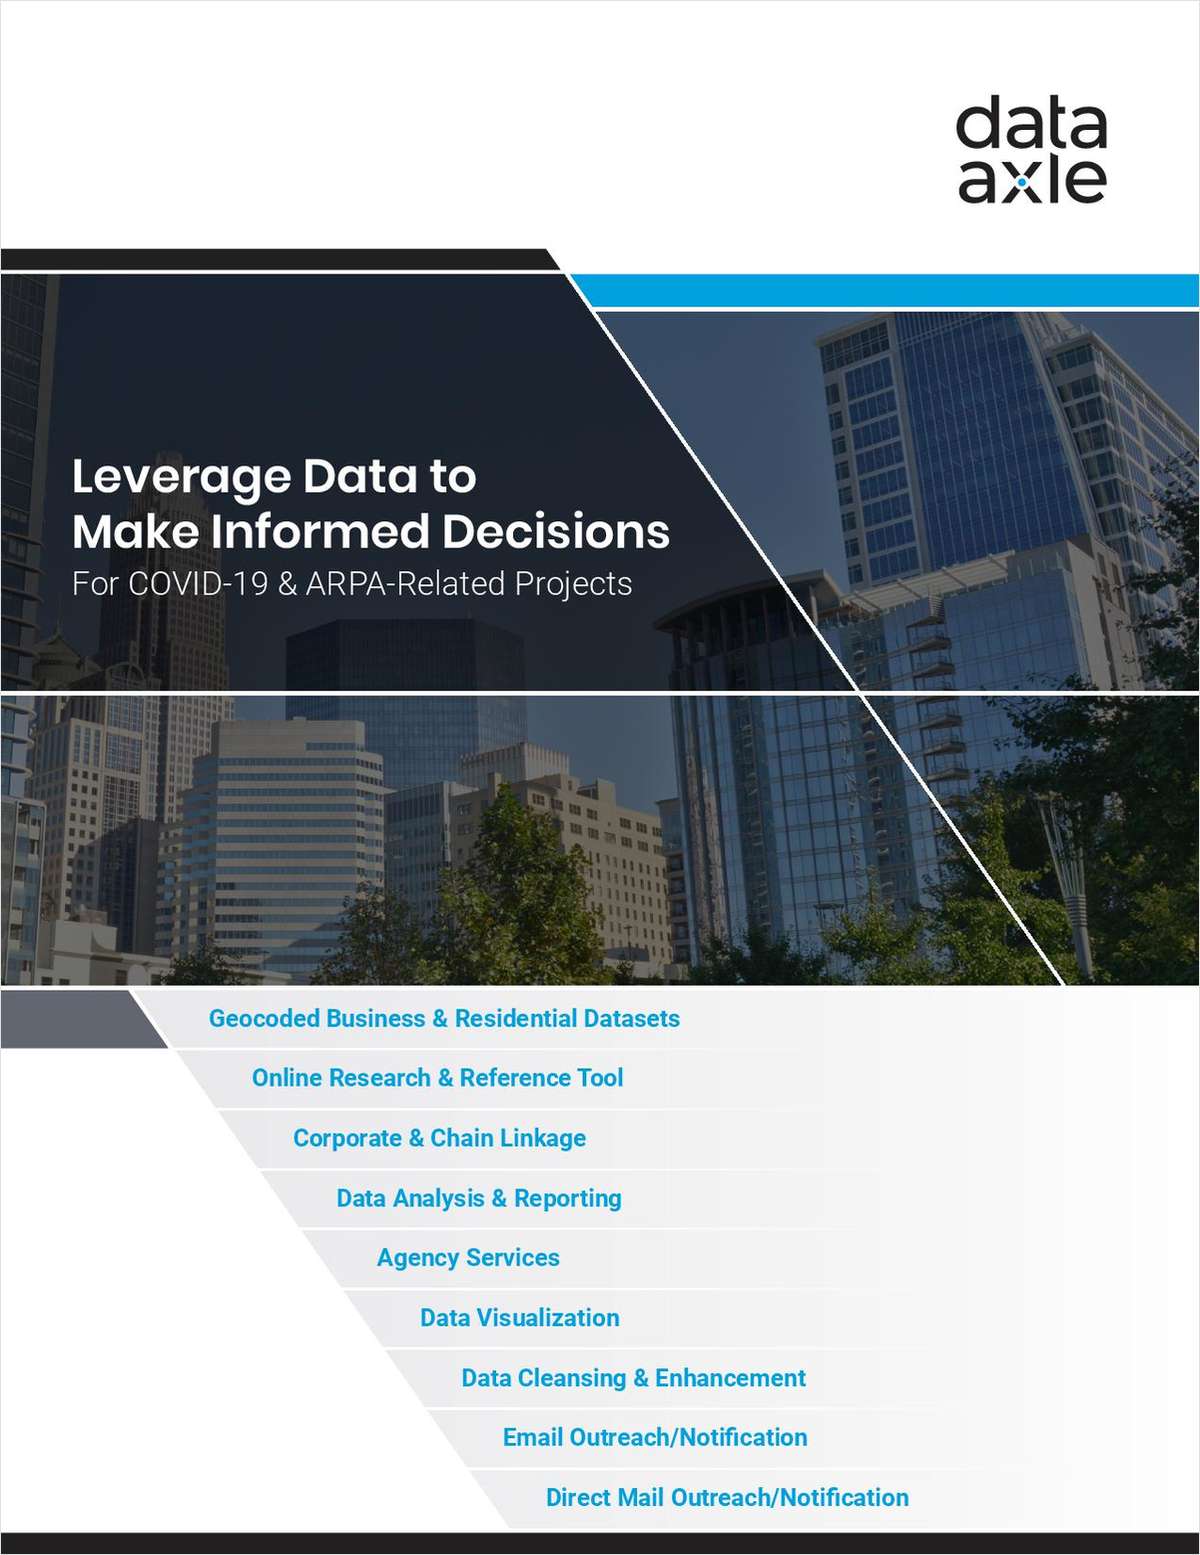 Leverage Data to Make Informed Decisions